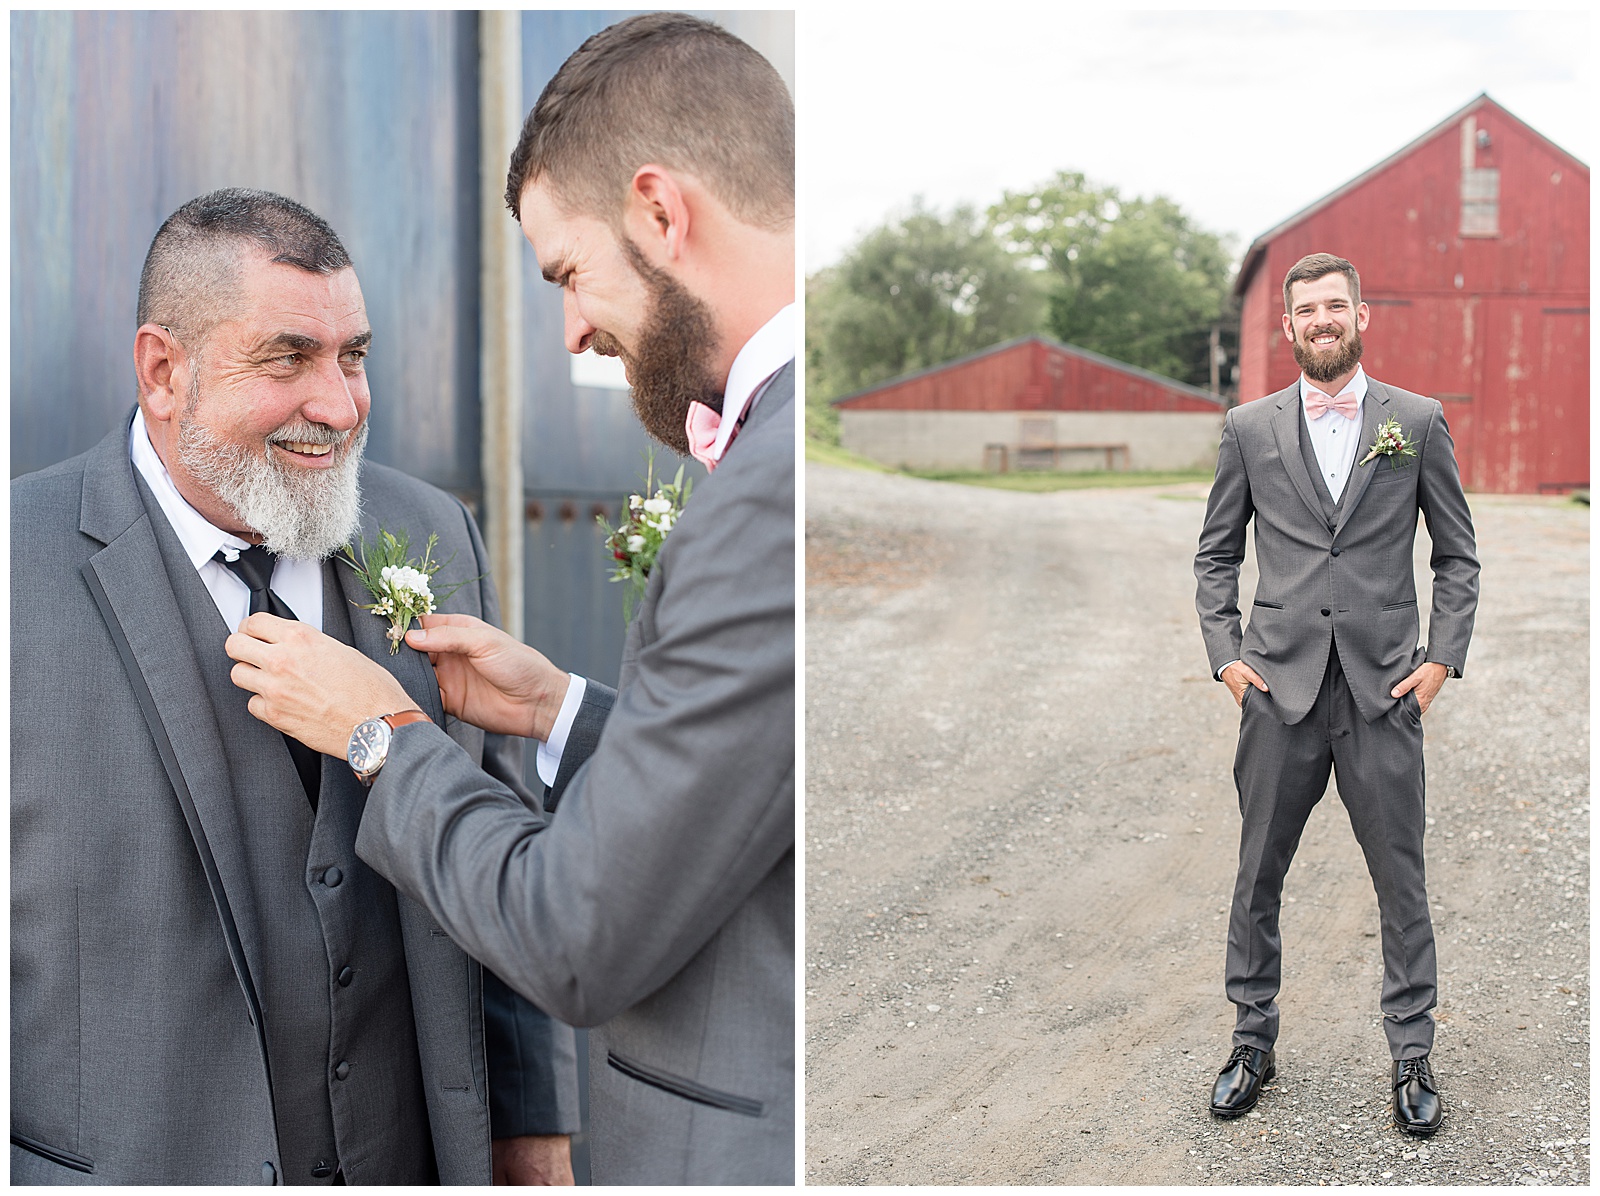 groom portrait in front of red barn at Country barn